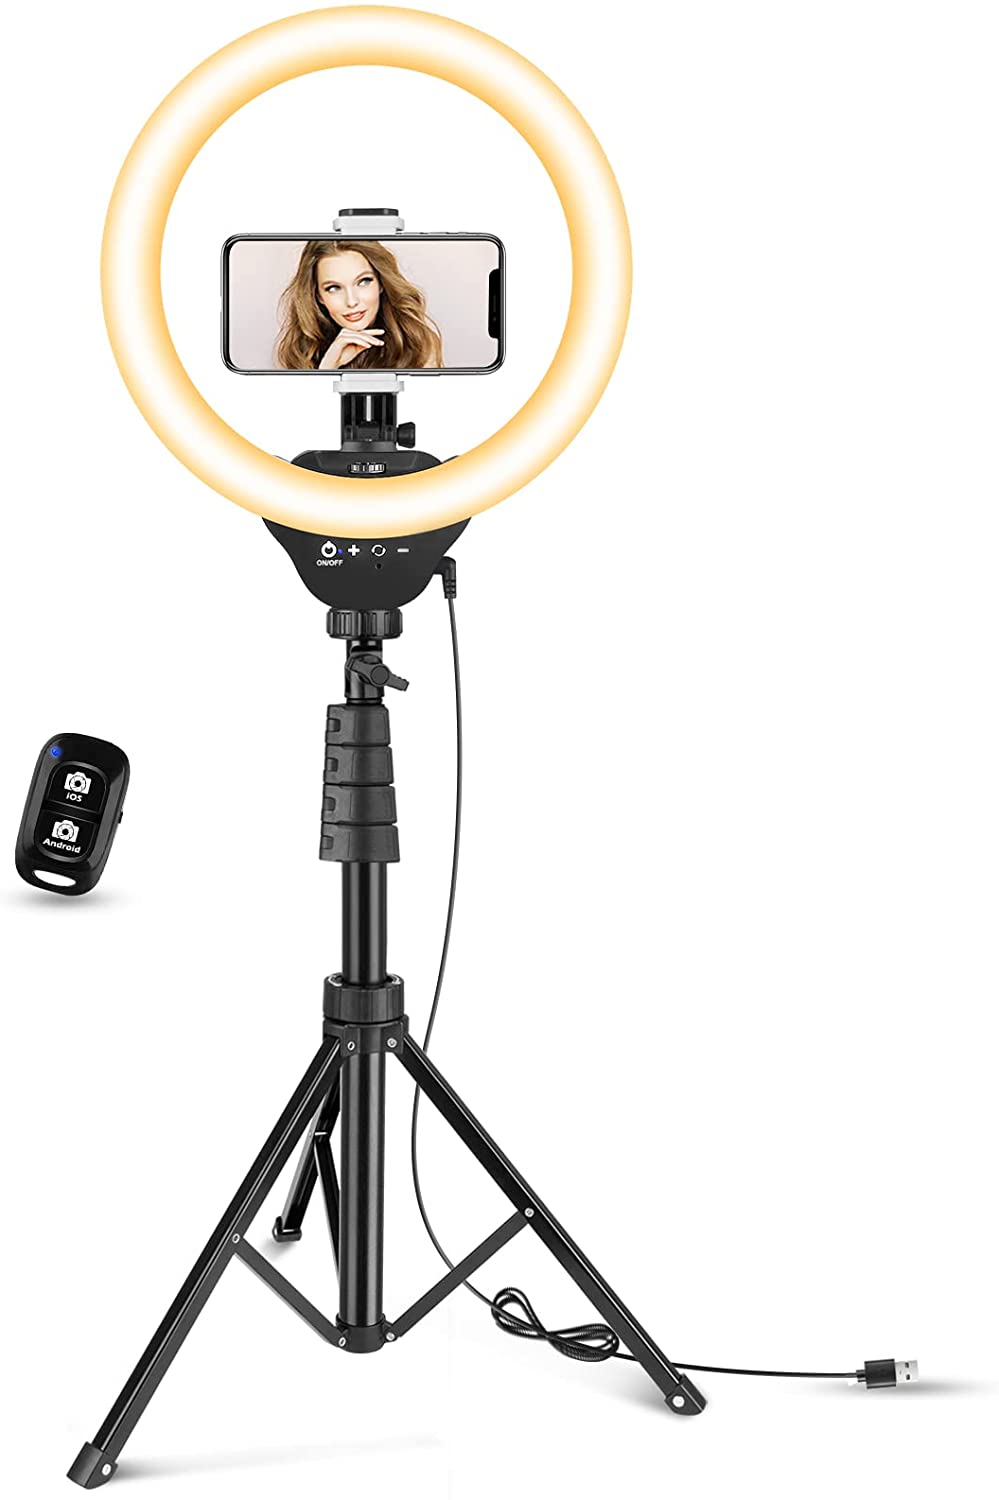 12” LED Ring Light with Stand and Phone Holder, Aureday 3000K-6000K Dimmable Selfie Ringlight for YouTube Video/Live Stream/Makeup